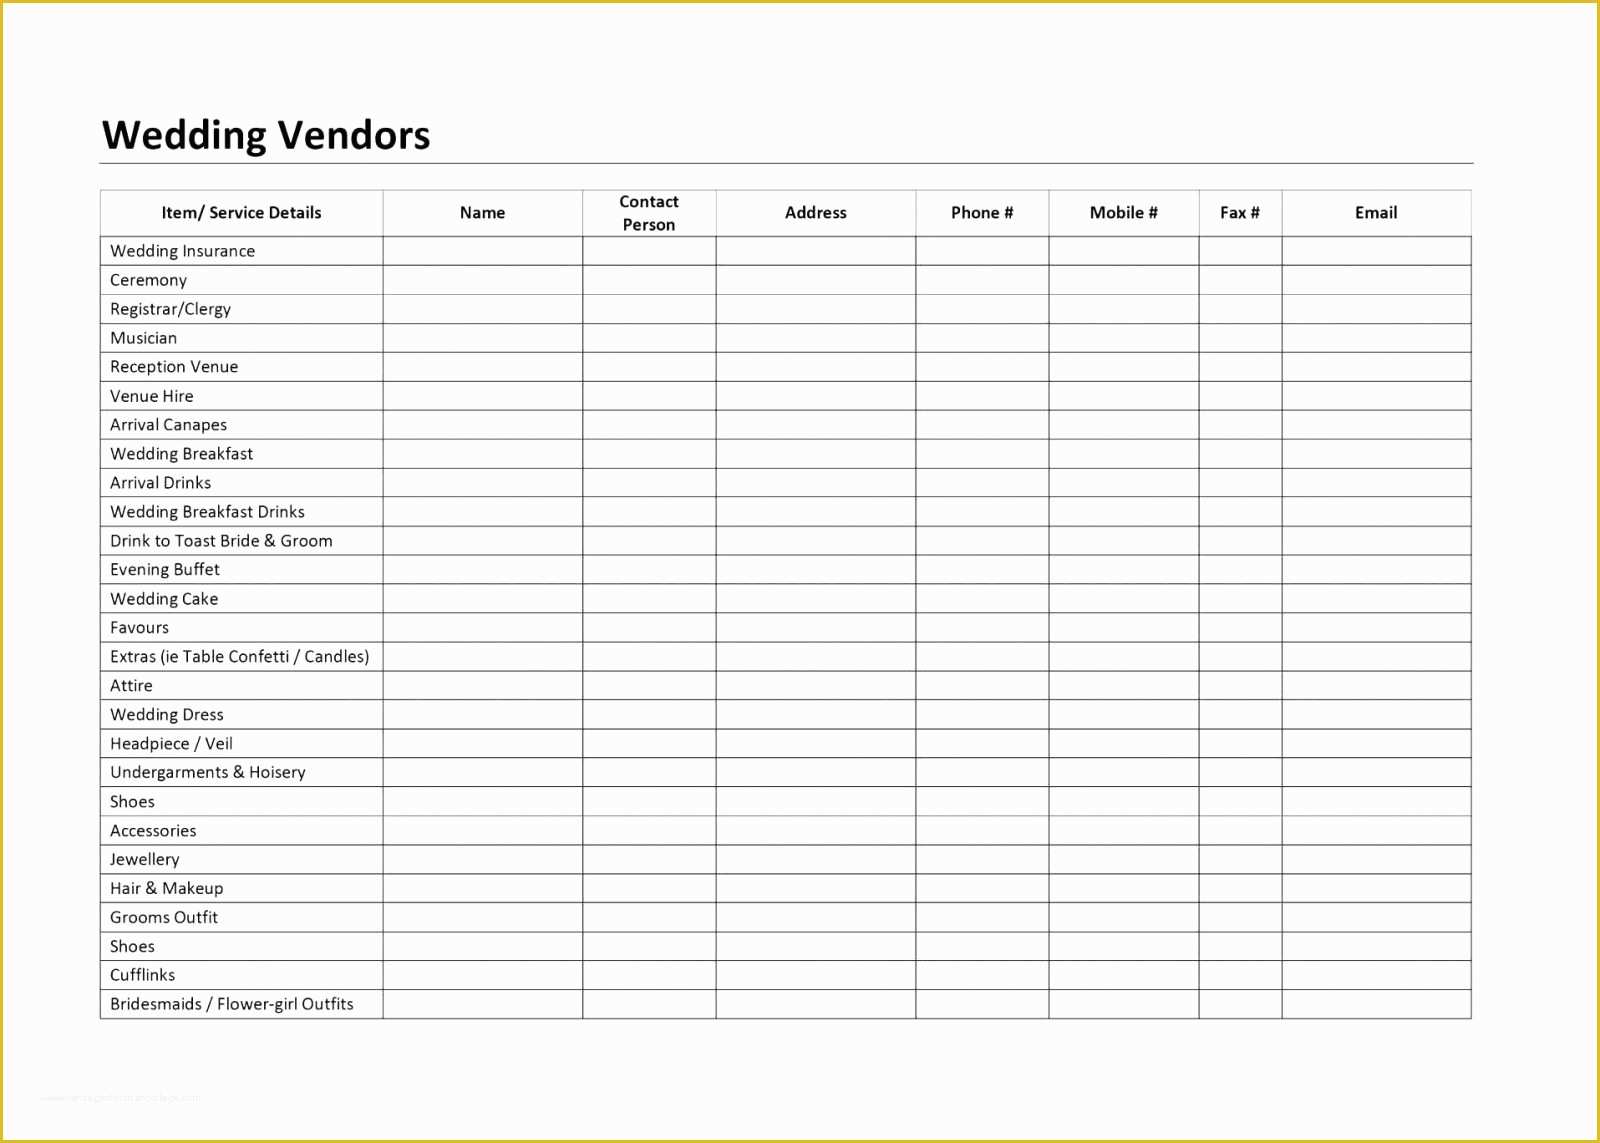 Free Accounting Spreadsheet Templates for Small Business Of Small Business Spreadsheet Templates Free Kubre Euforic Co